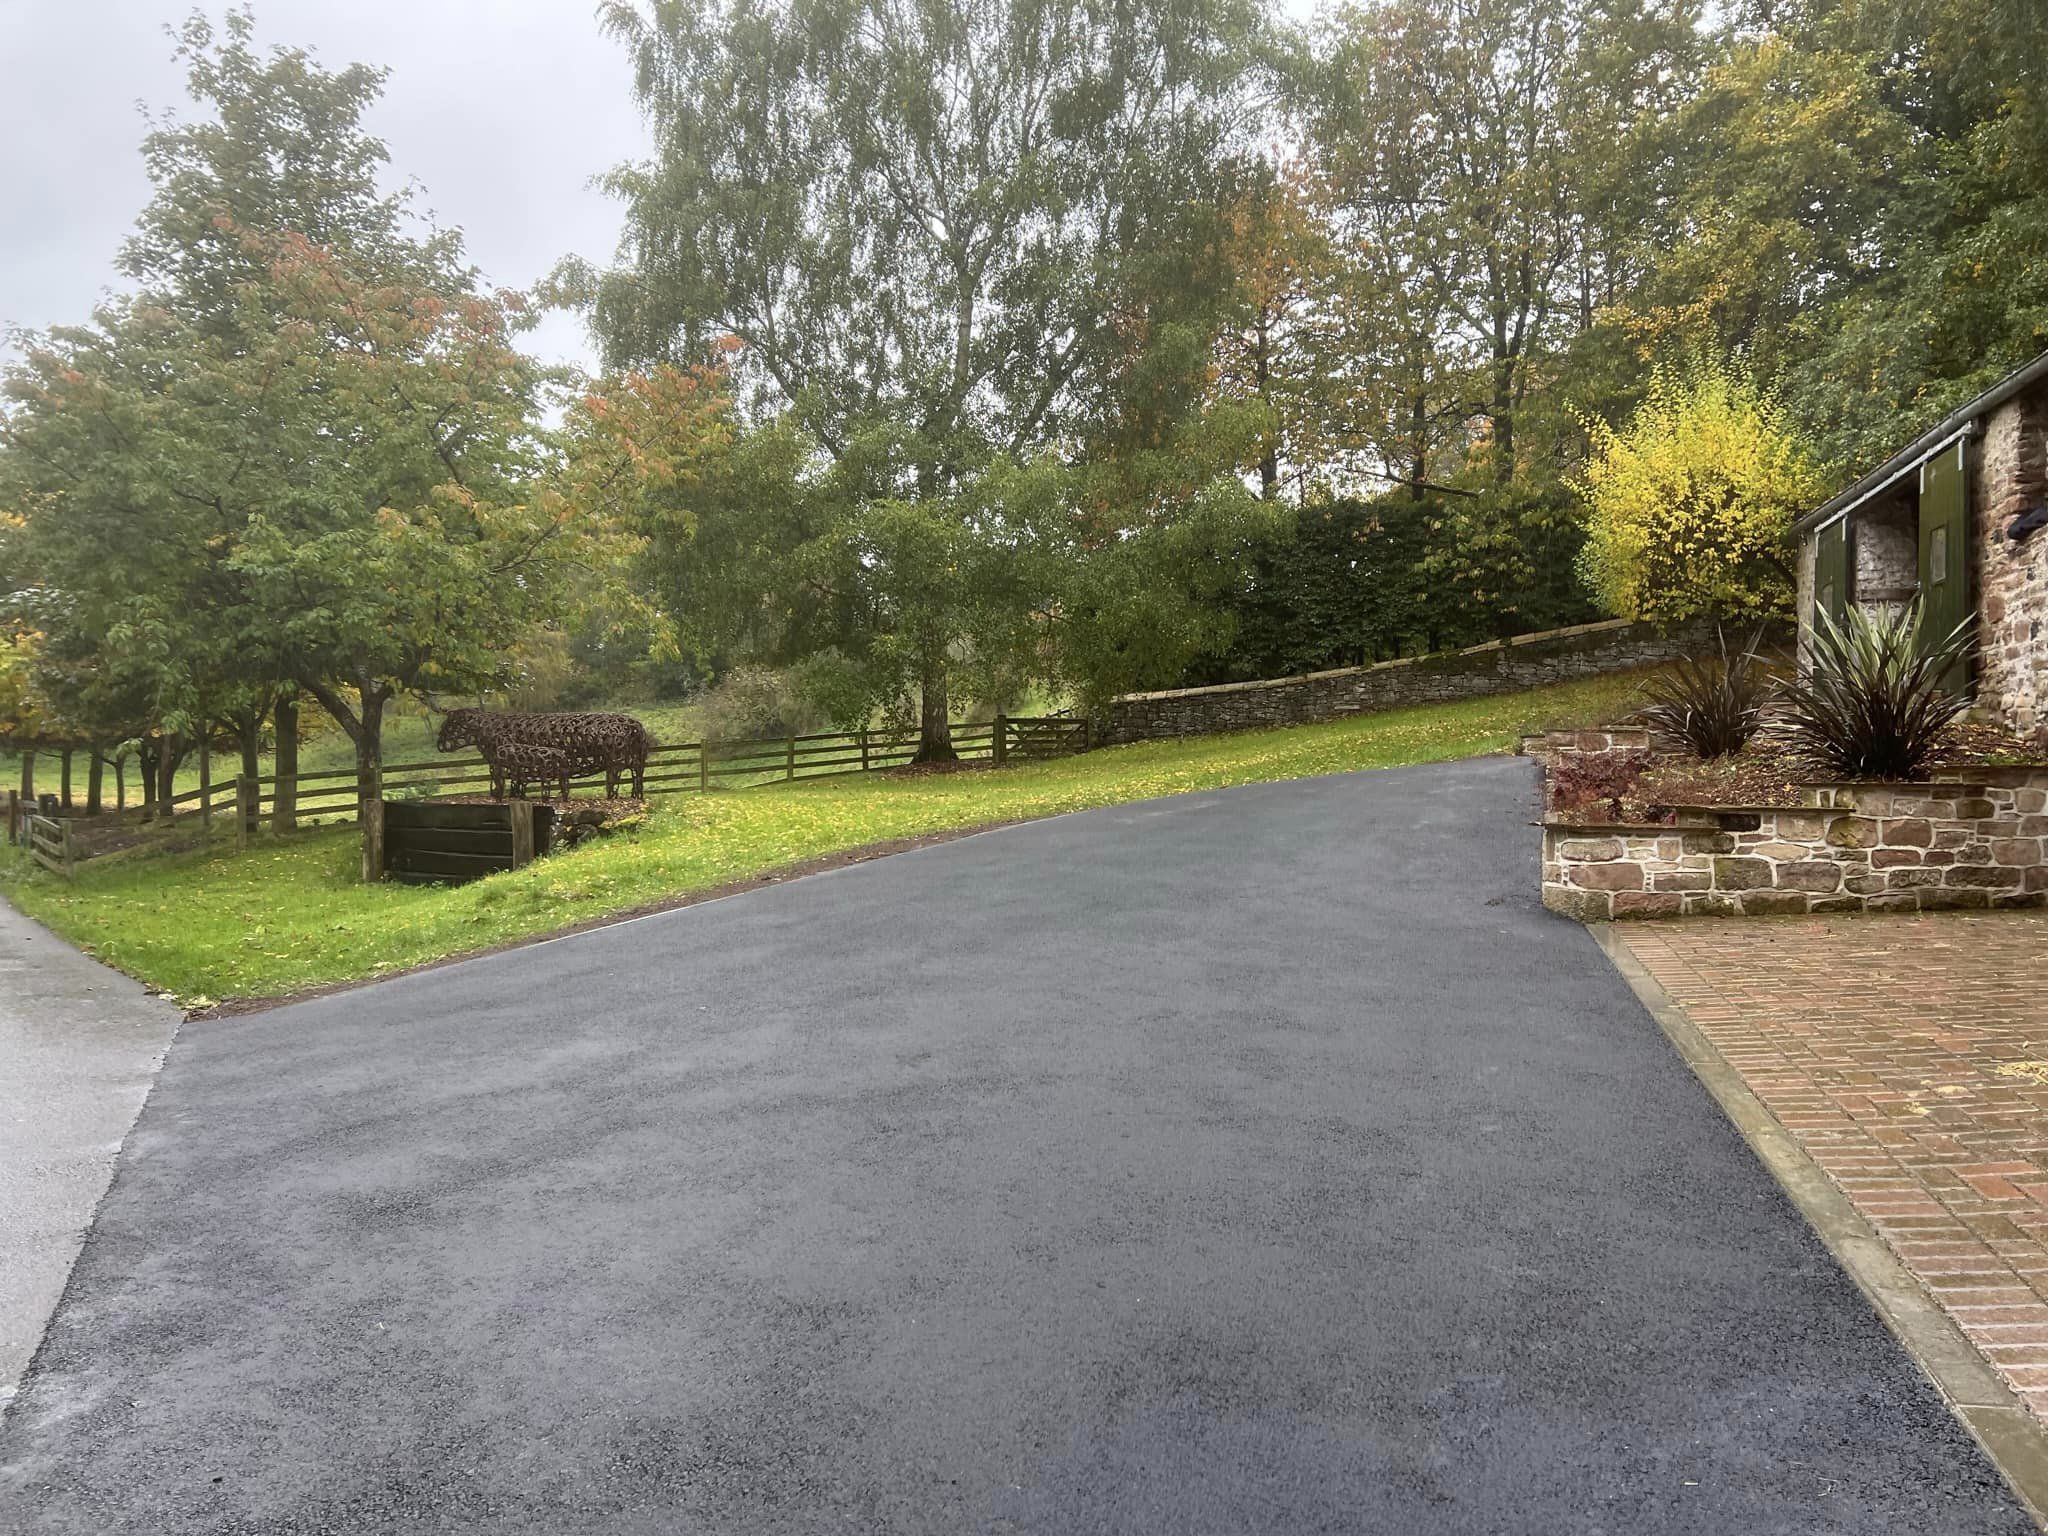 Tarmac Stables, Farm Road Completed Work